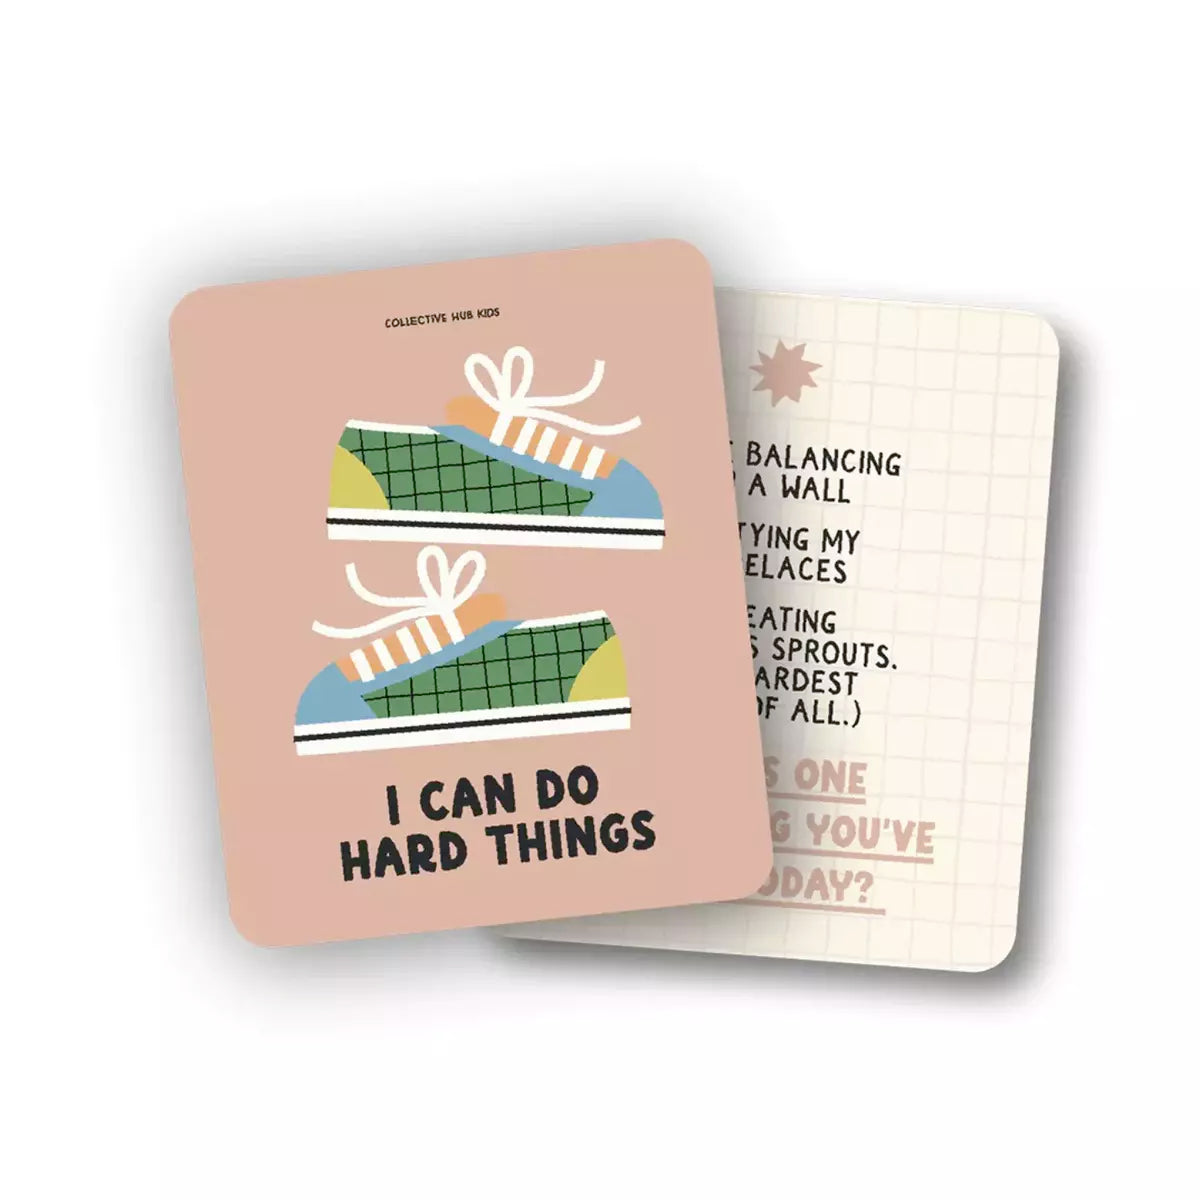 I can do Learning About Me coasters for kids by Collective Hub.